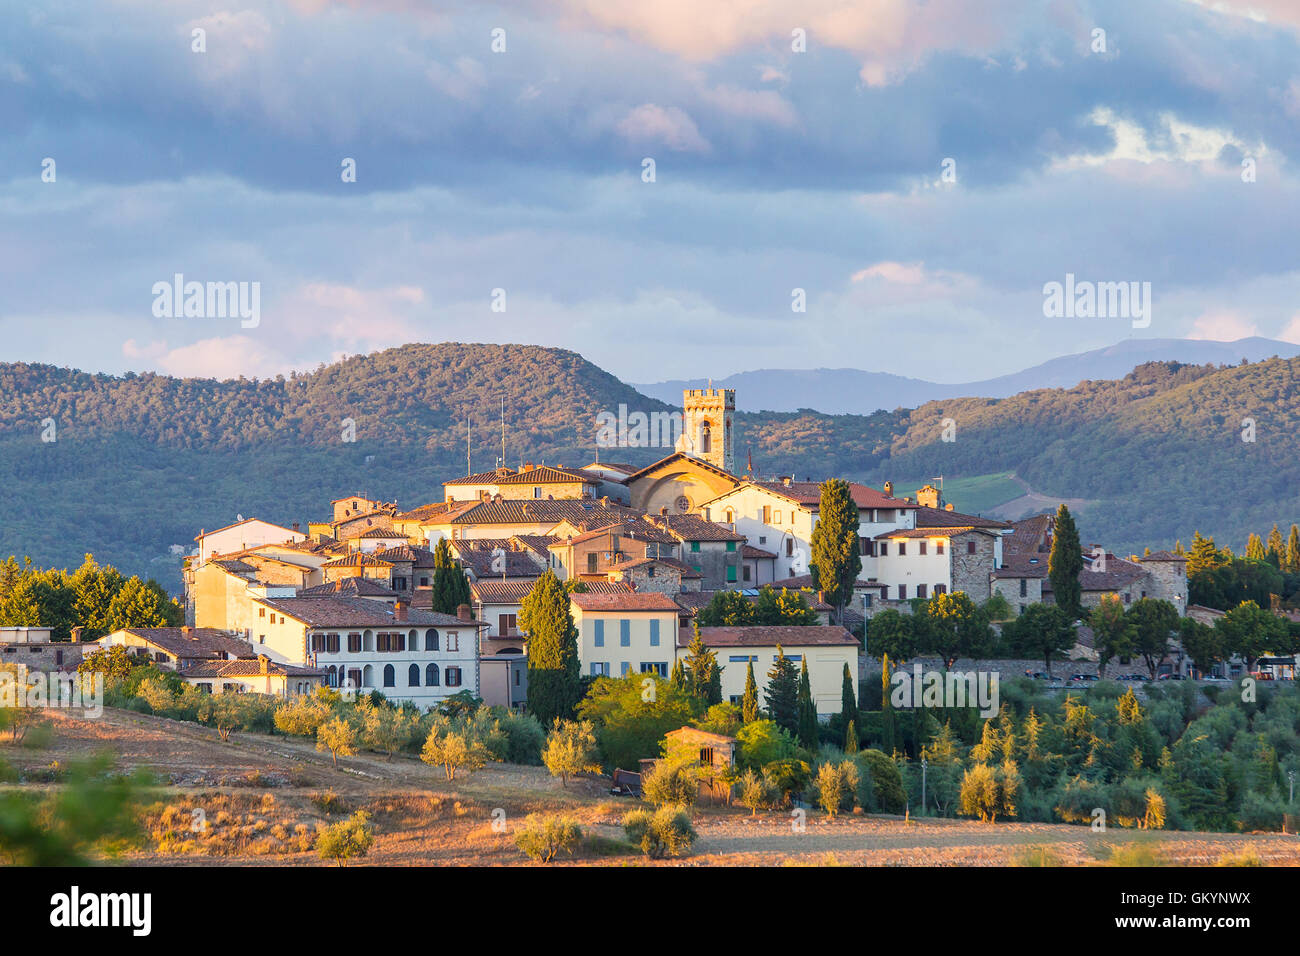 The village of Radda in Chianti at sunset, province of Siena, Tuscany, Italy. Stock Photo